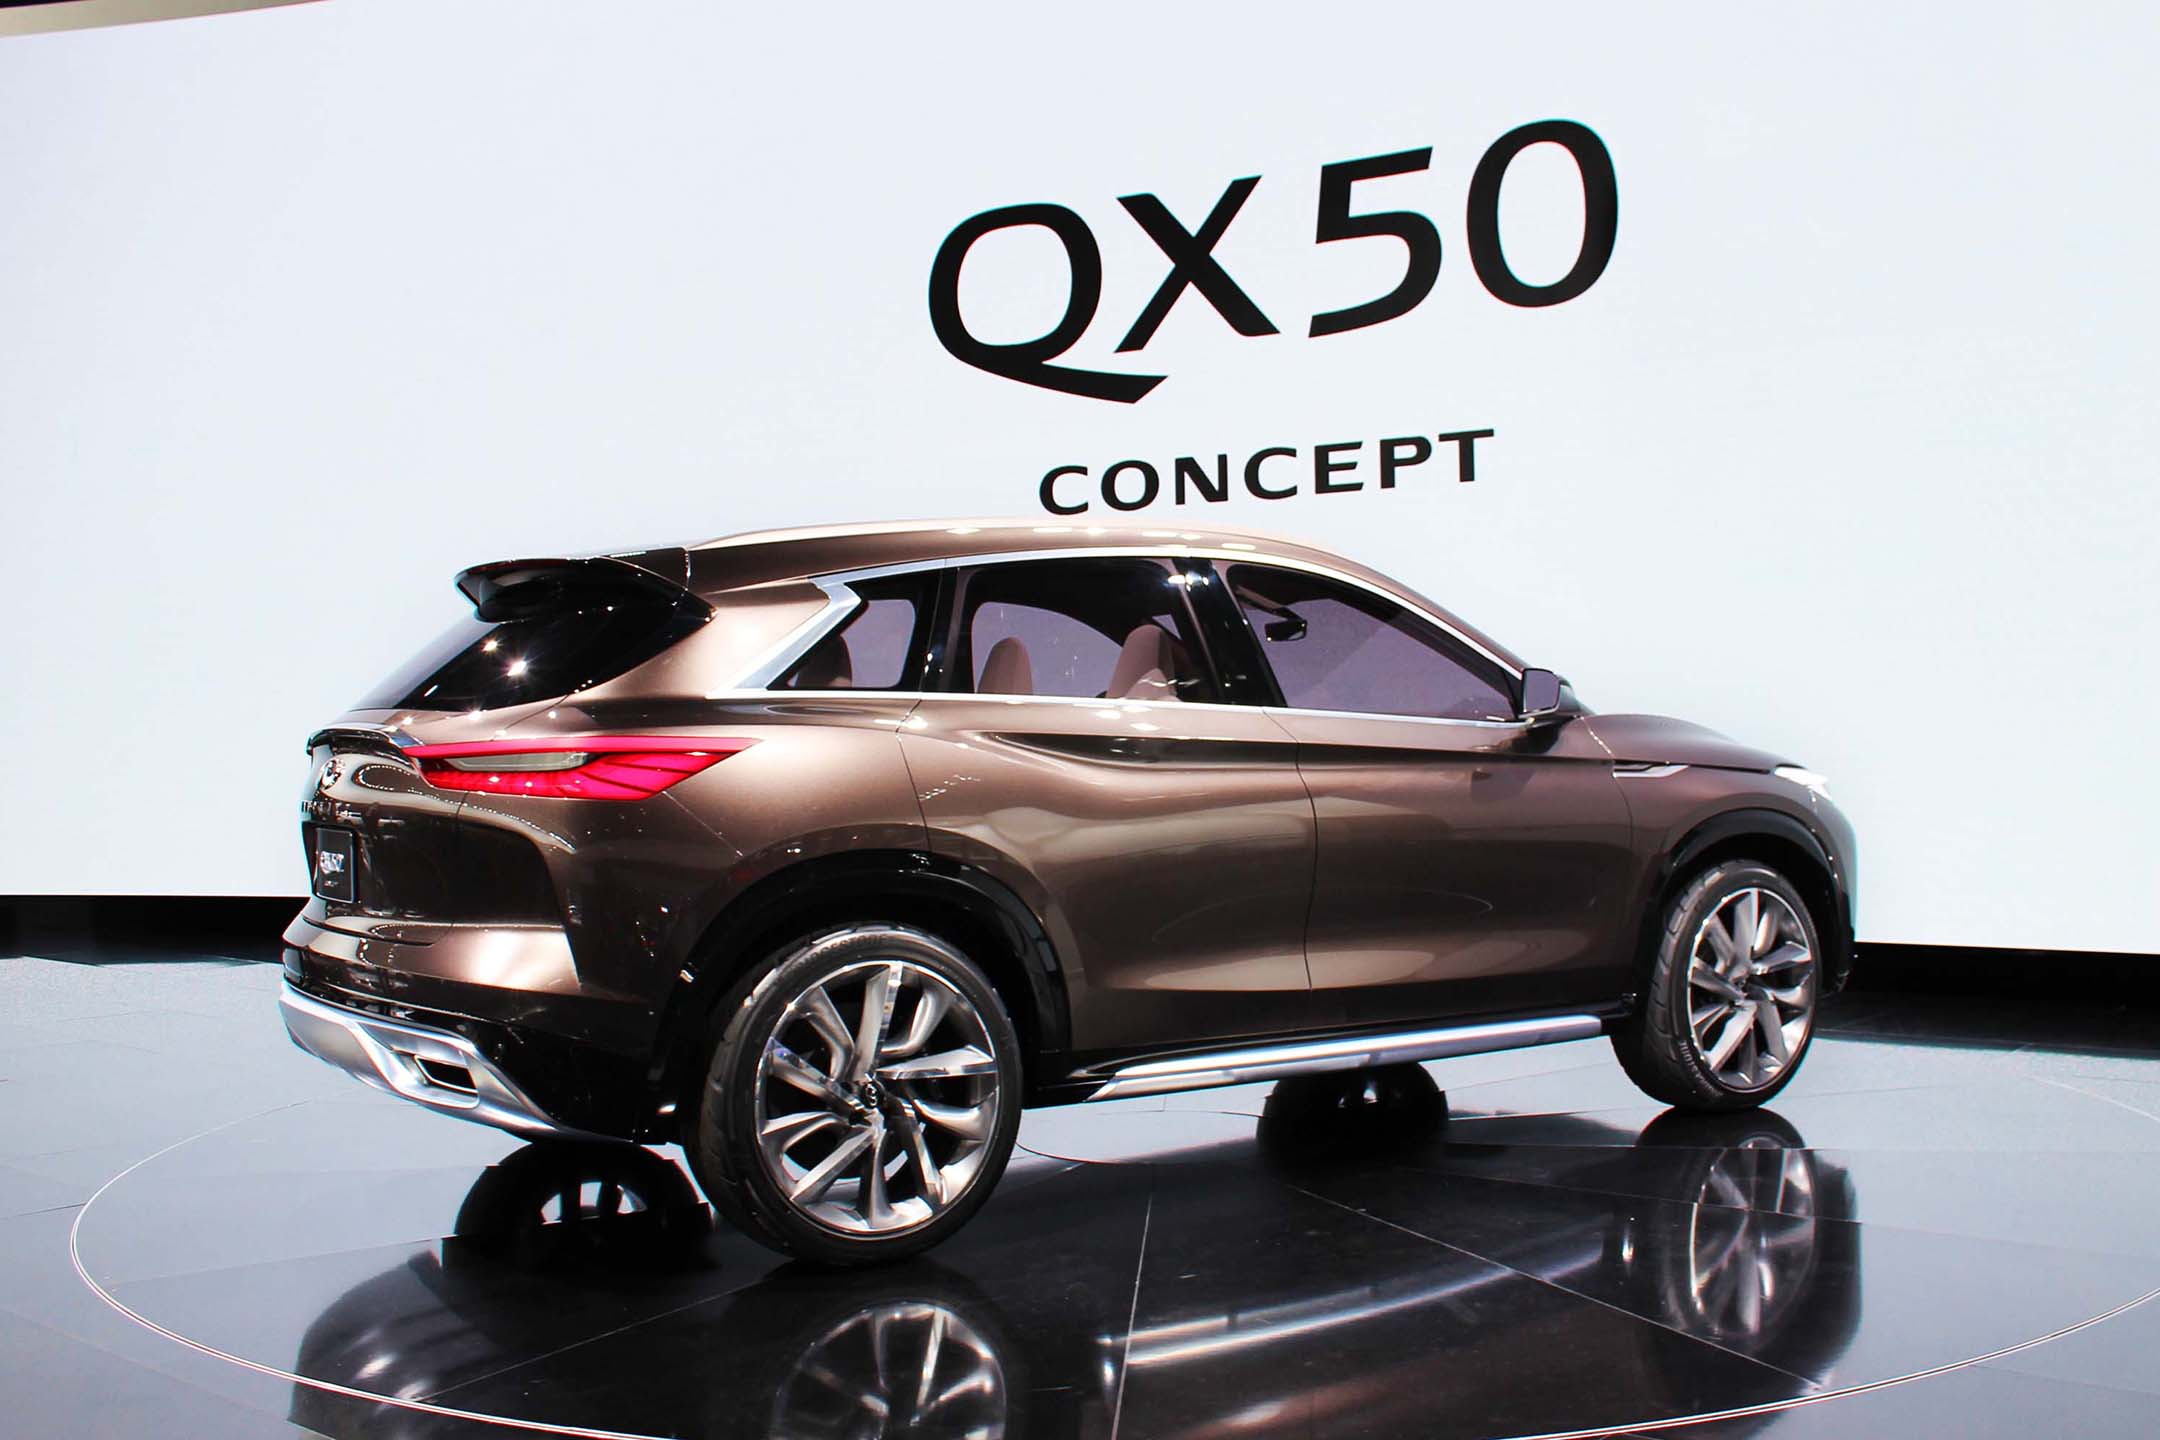 SG: I love the design on the QX50 concept. It takes the Infiniti design to a whole new level and the “spread wings” look to the headlights and taillights is gorgeous.